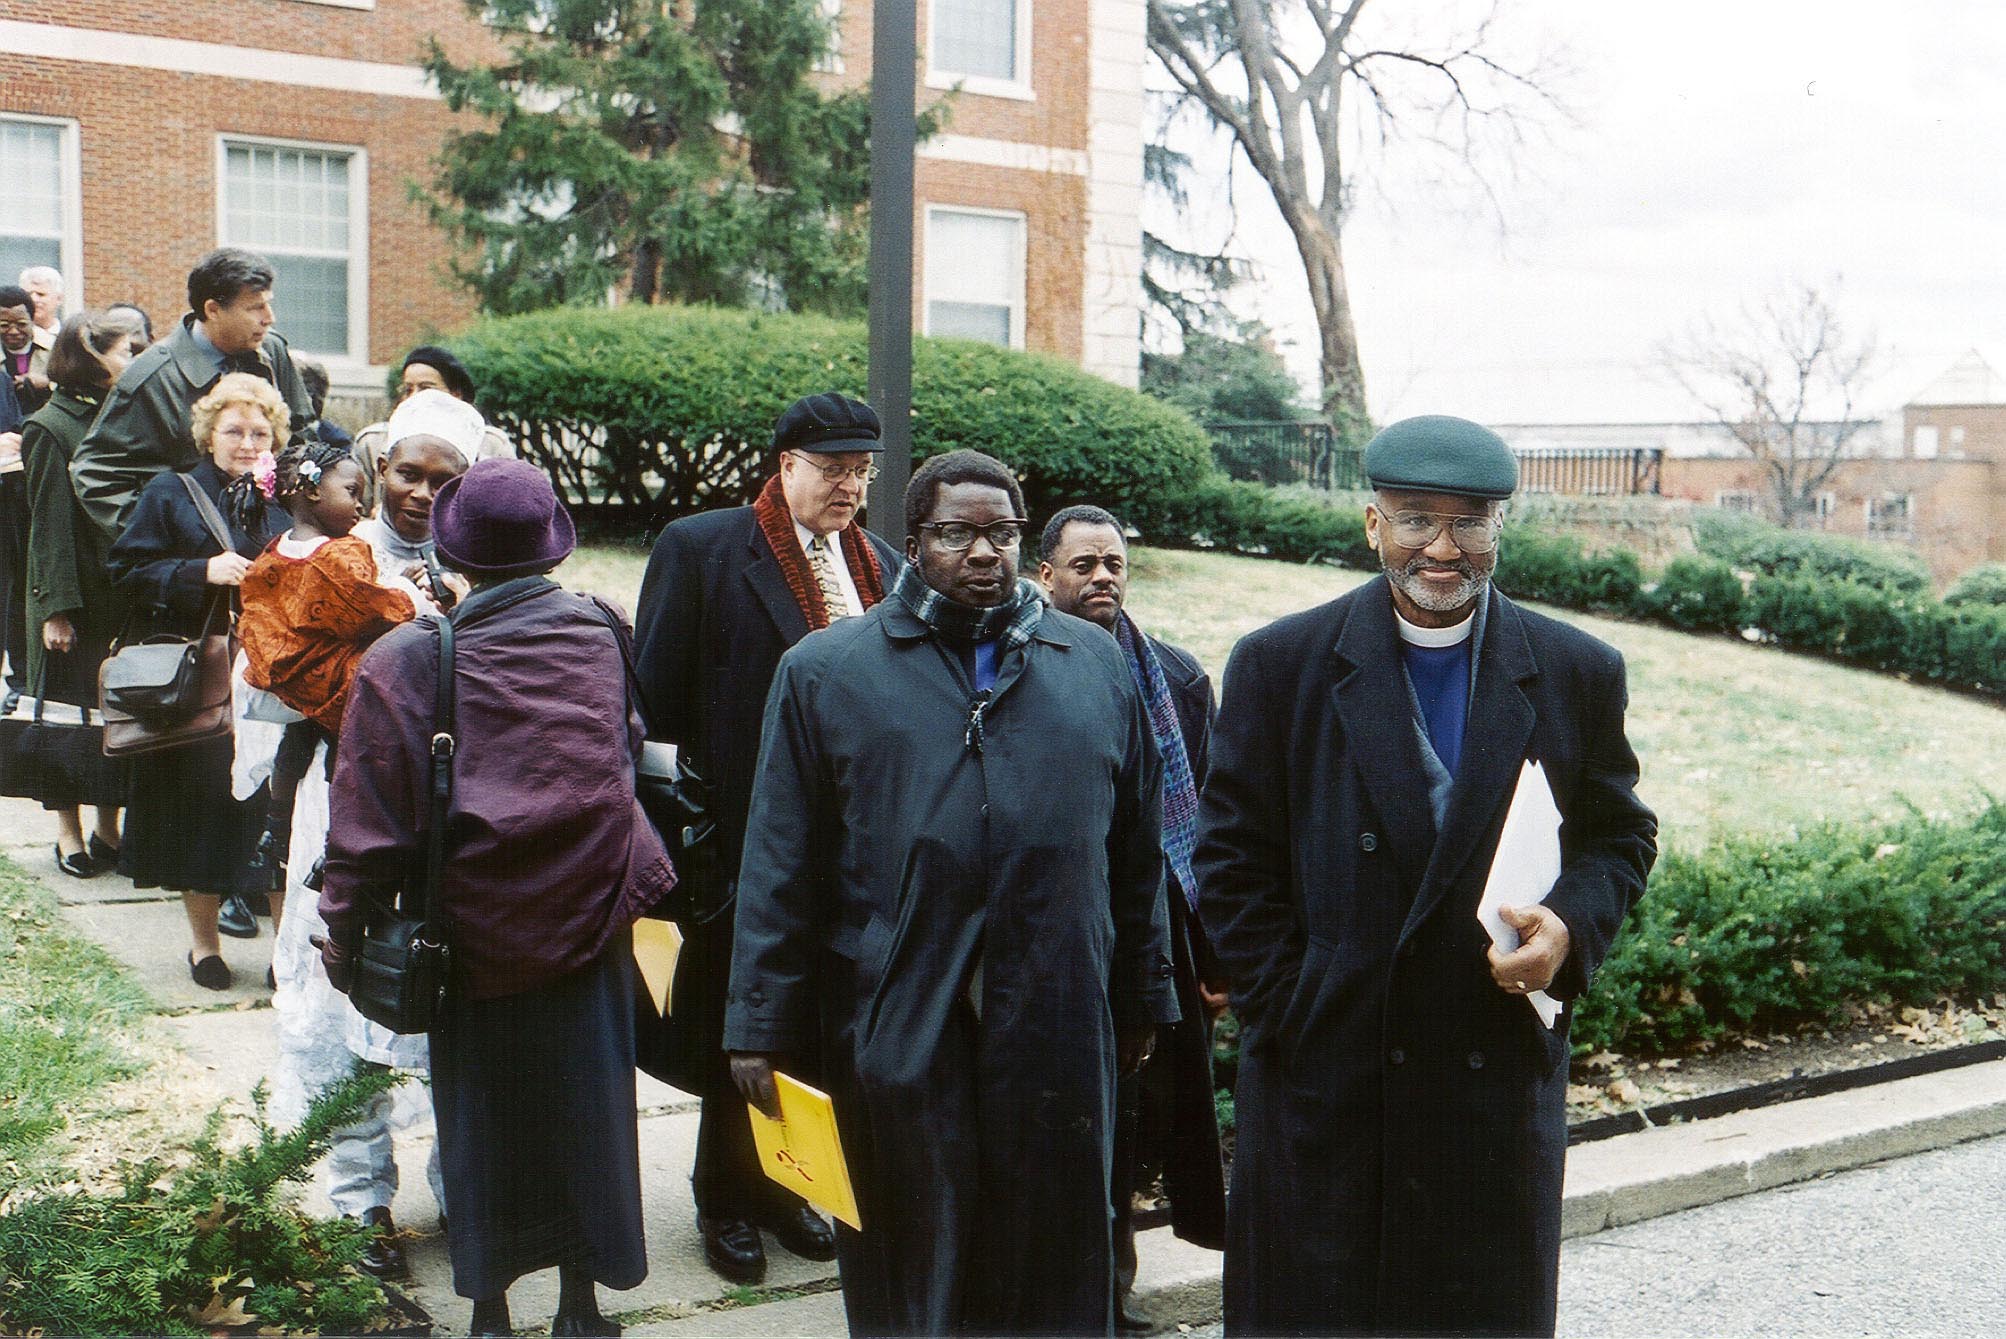 United Methodist Bishop Felton May (right) walks with Bishop Christopher Jokomo of Zimbabwe (center) following a meeting of global religious leaders to discuss AIDS policy in Washington in 2000. May died Feb. 27 at his home in Ellicott City, Maryland. File photo by Dean Snyder.